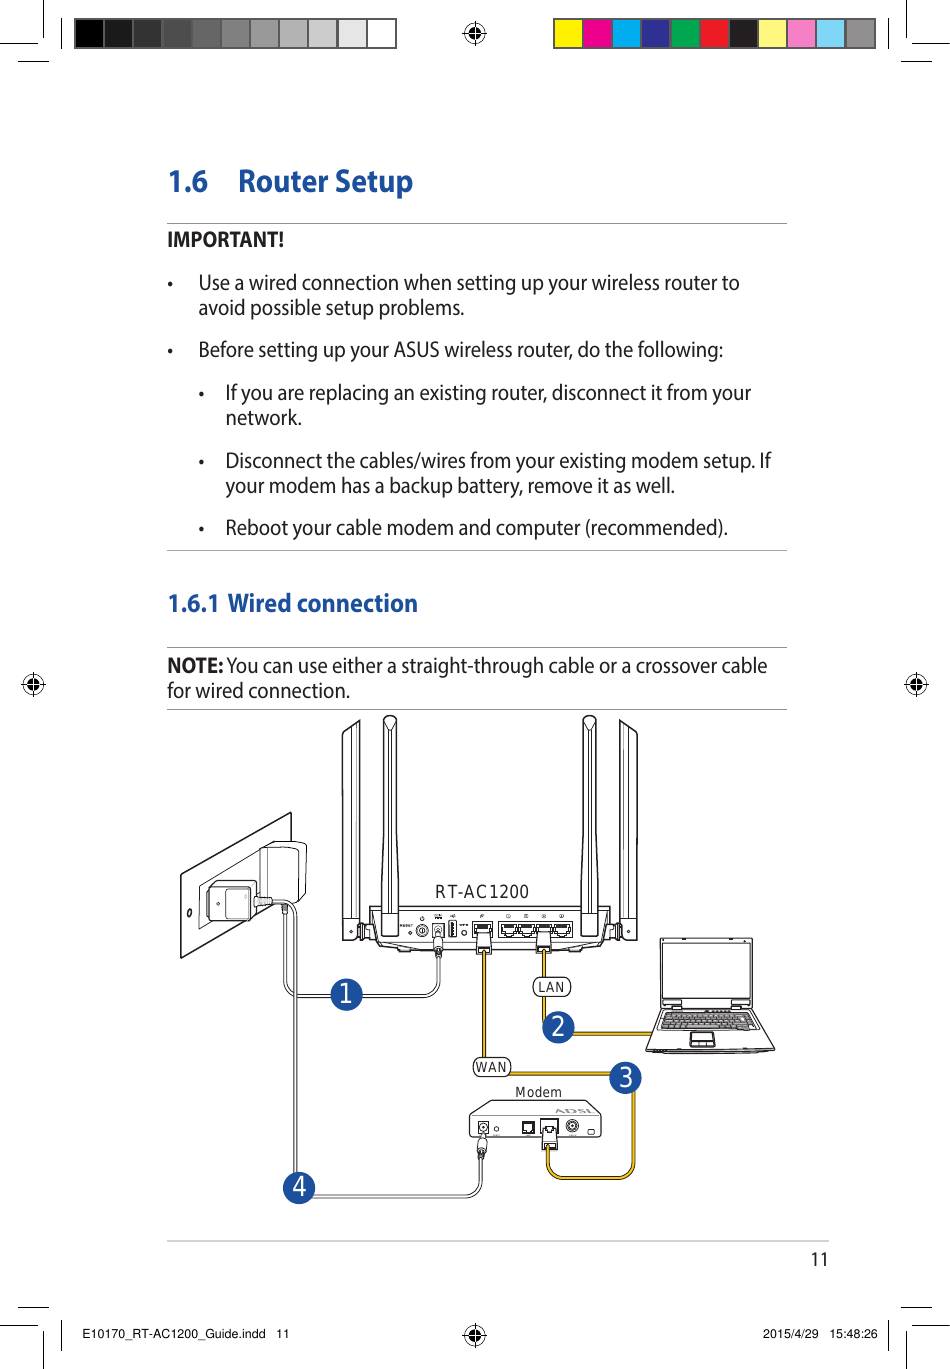 111.6  Router SetupIMPORTANT!• Useawiredconnectionwhensettingupyourwirelessroutertoavoid possible setup problems.• BeforesettingupyourASUSwirelessrouter,dothefollowing: • Ifyouarereplacinganexistingrouter,disconnectitfromyournetwork. • Disconnectthecables/wiresfromyourexistingmodemsetup.Ifyour modem has a backup battery, remove it as well.  • Rebootyourcablemodemandcomputer(recommended).1.6.1 Wired connectionNOTE: You can use either a straight-through cable or a crossover cable for wired connection.RT-AC1200Modem 3142WANLANE10170_RT-AC1200_Guide.indd   11 2015/4/29   15:48:26